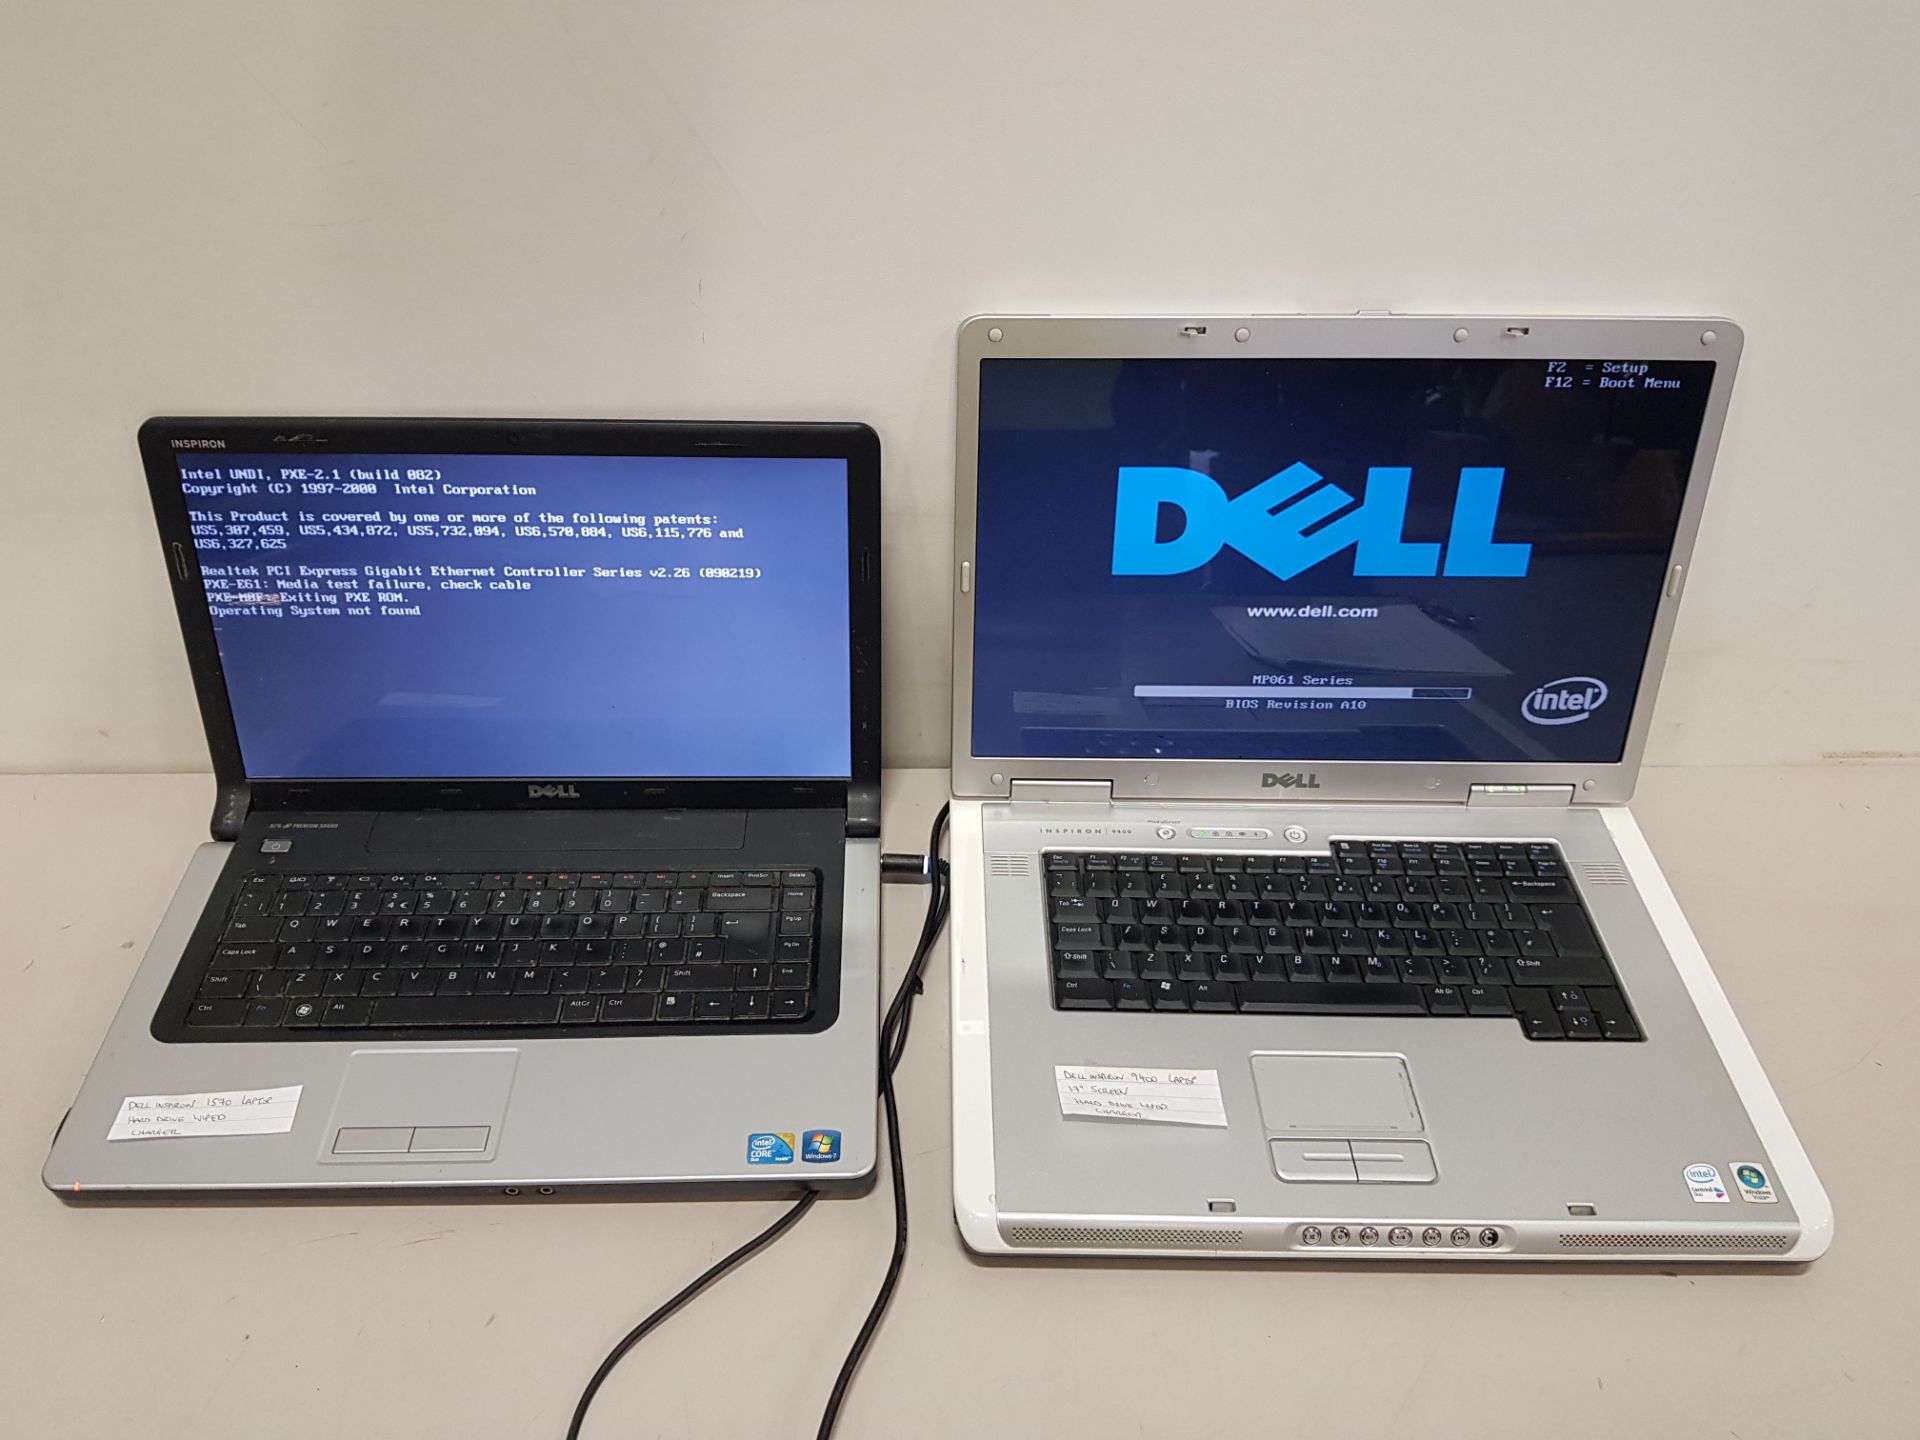 2 X DELL LAPTOPS WITH CHARGERS - 1570 AND 9400 (NO O/S)